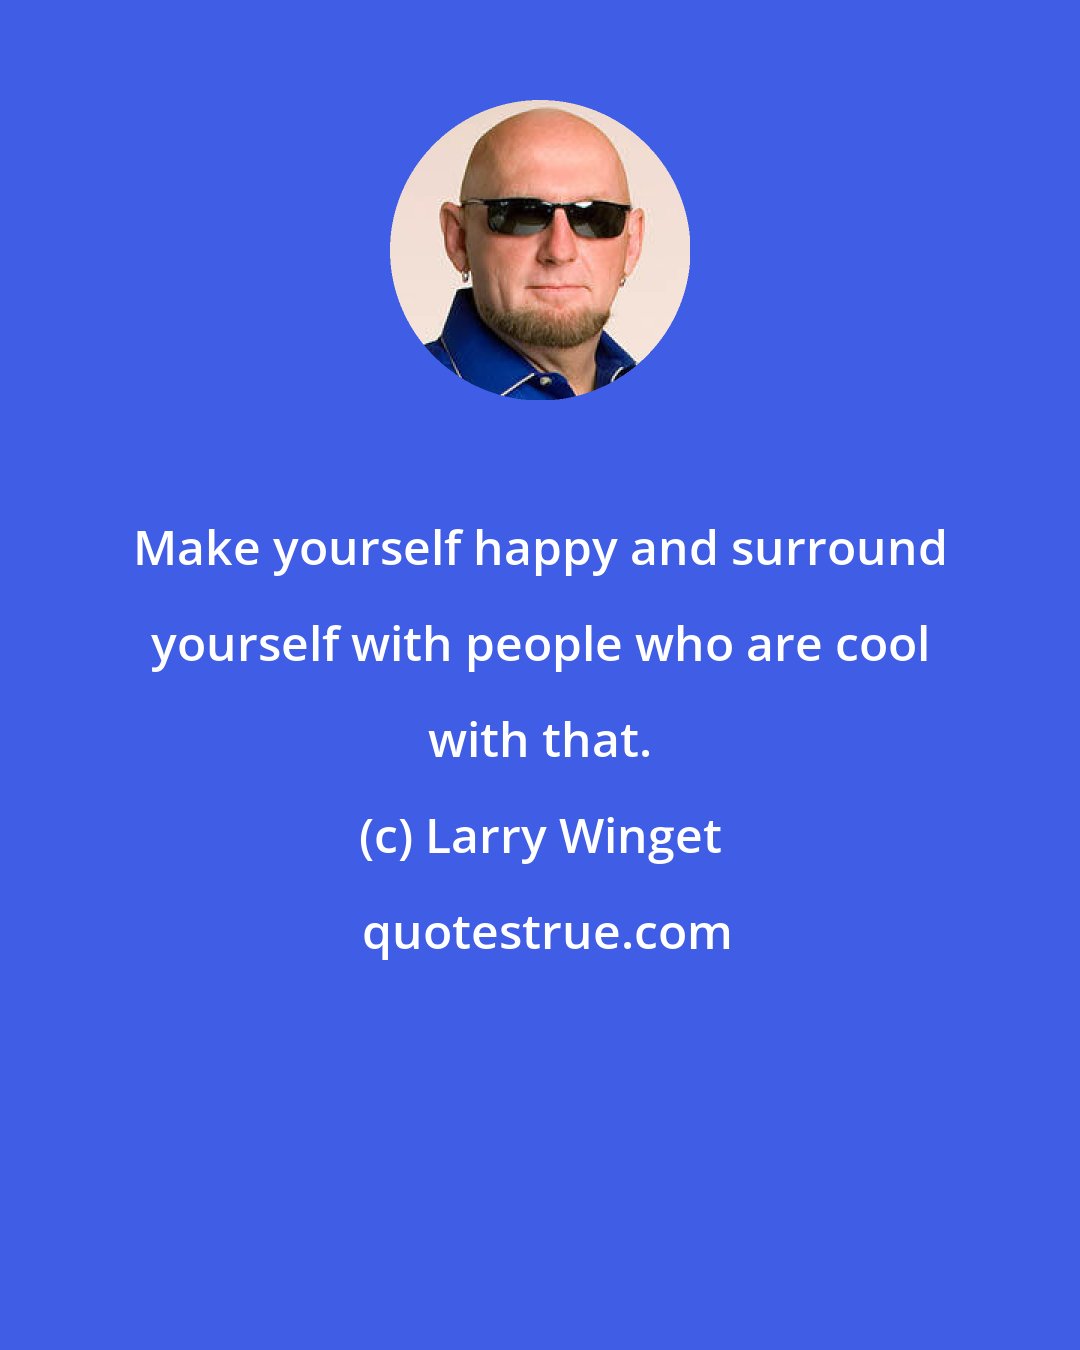 Larry Winget: Make yourself happy and surround yourself with people who are cool with that.